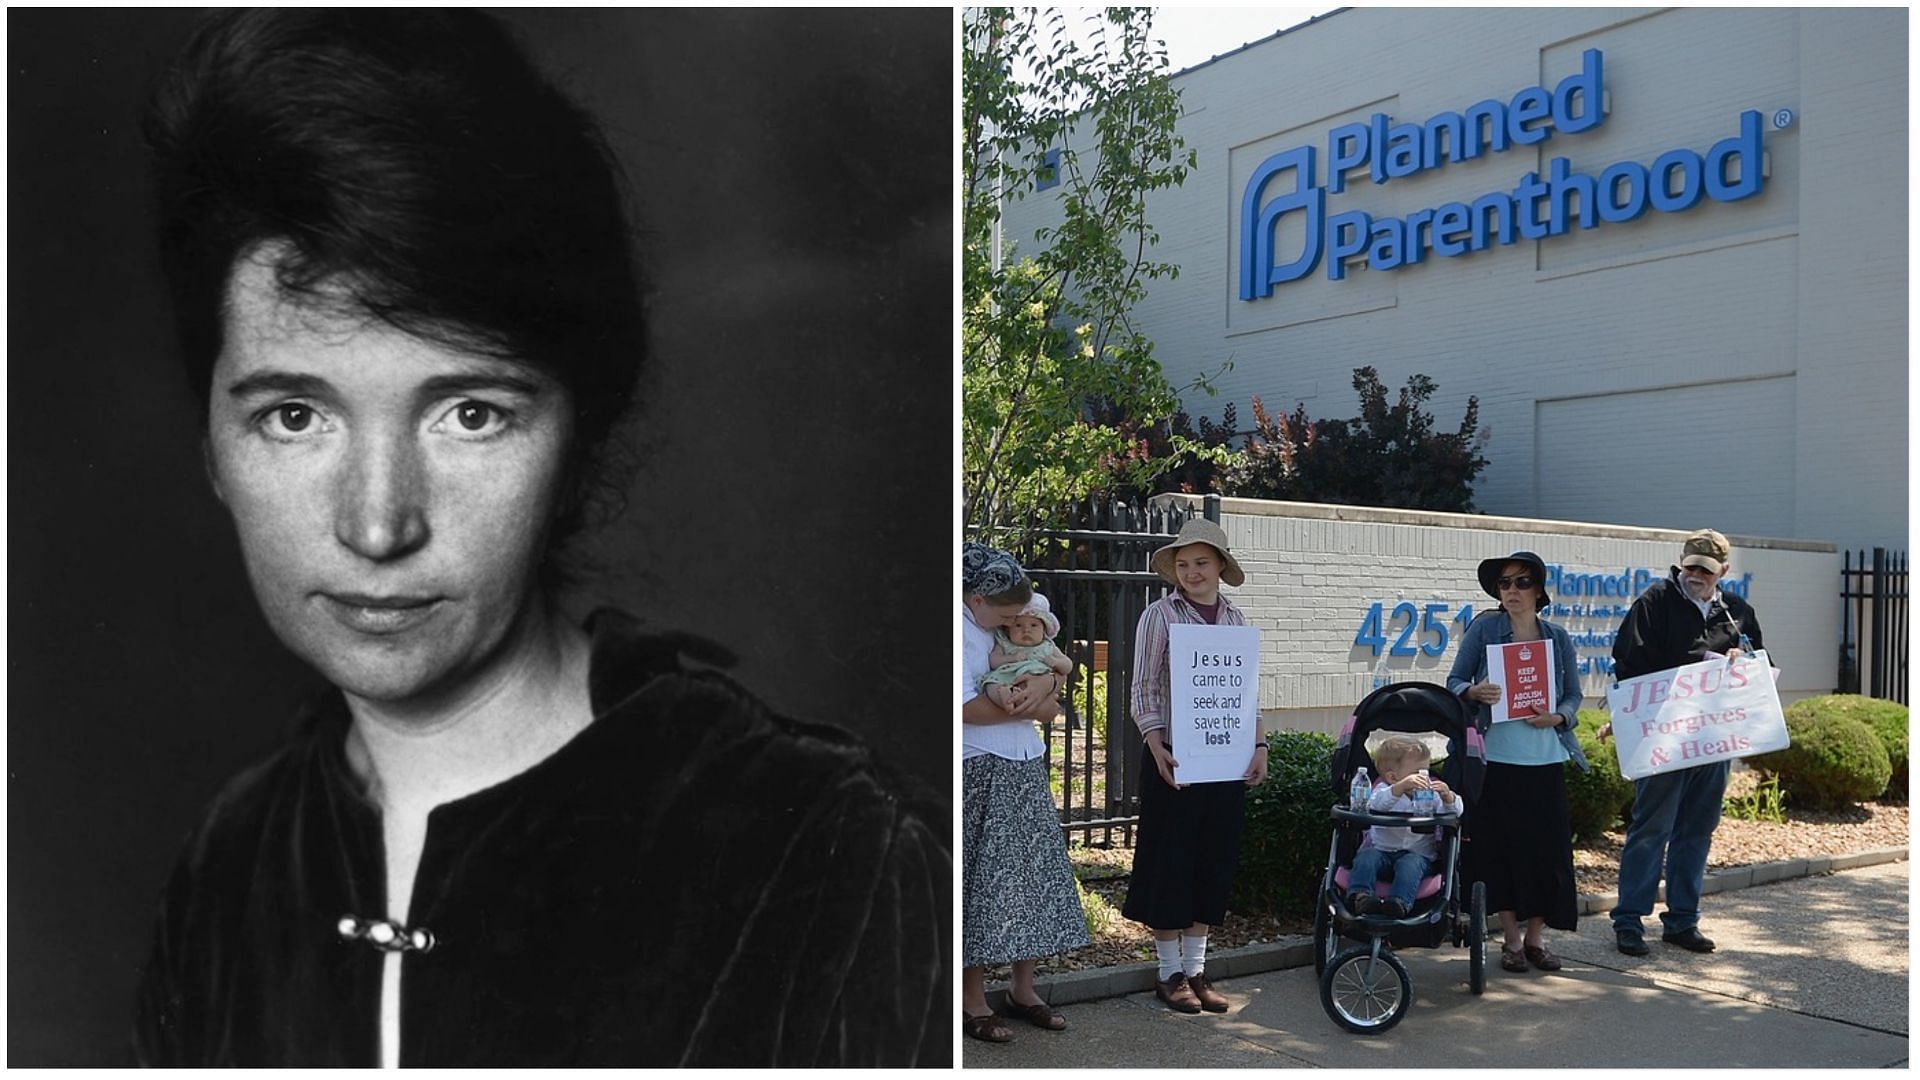 Margaret Sanger and Planned Parenthood (Image via Hulton Archive/Getty Images, and Michael B. Thomas/Getty Images)